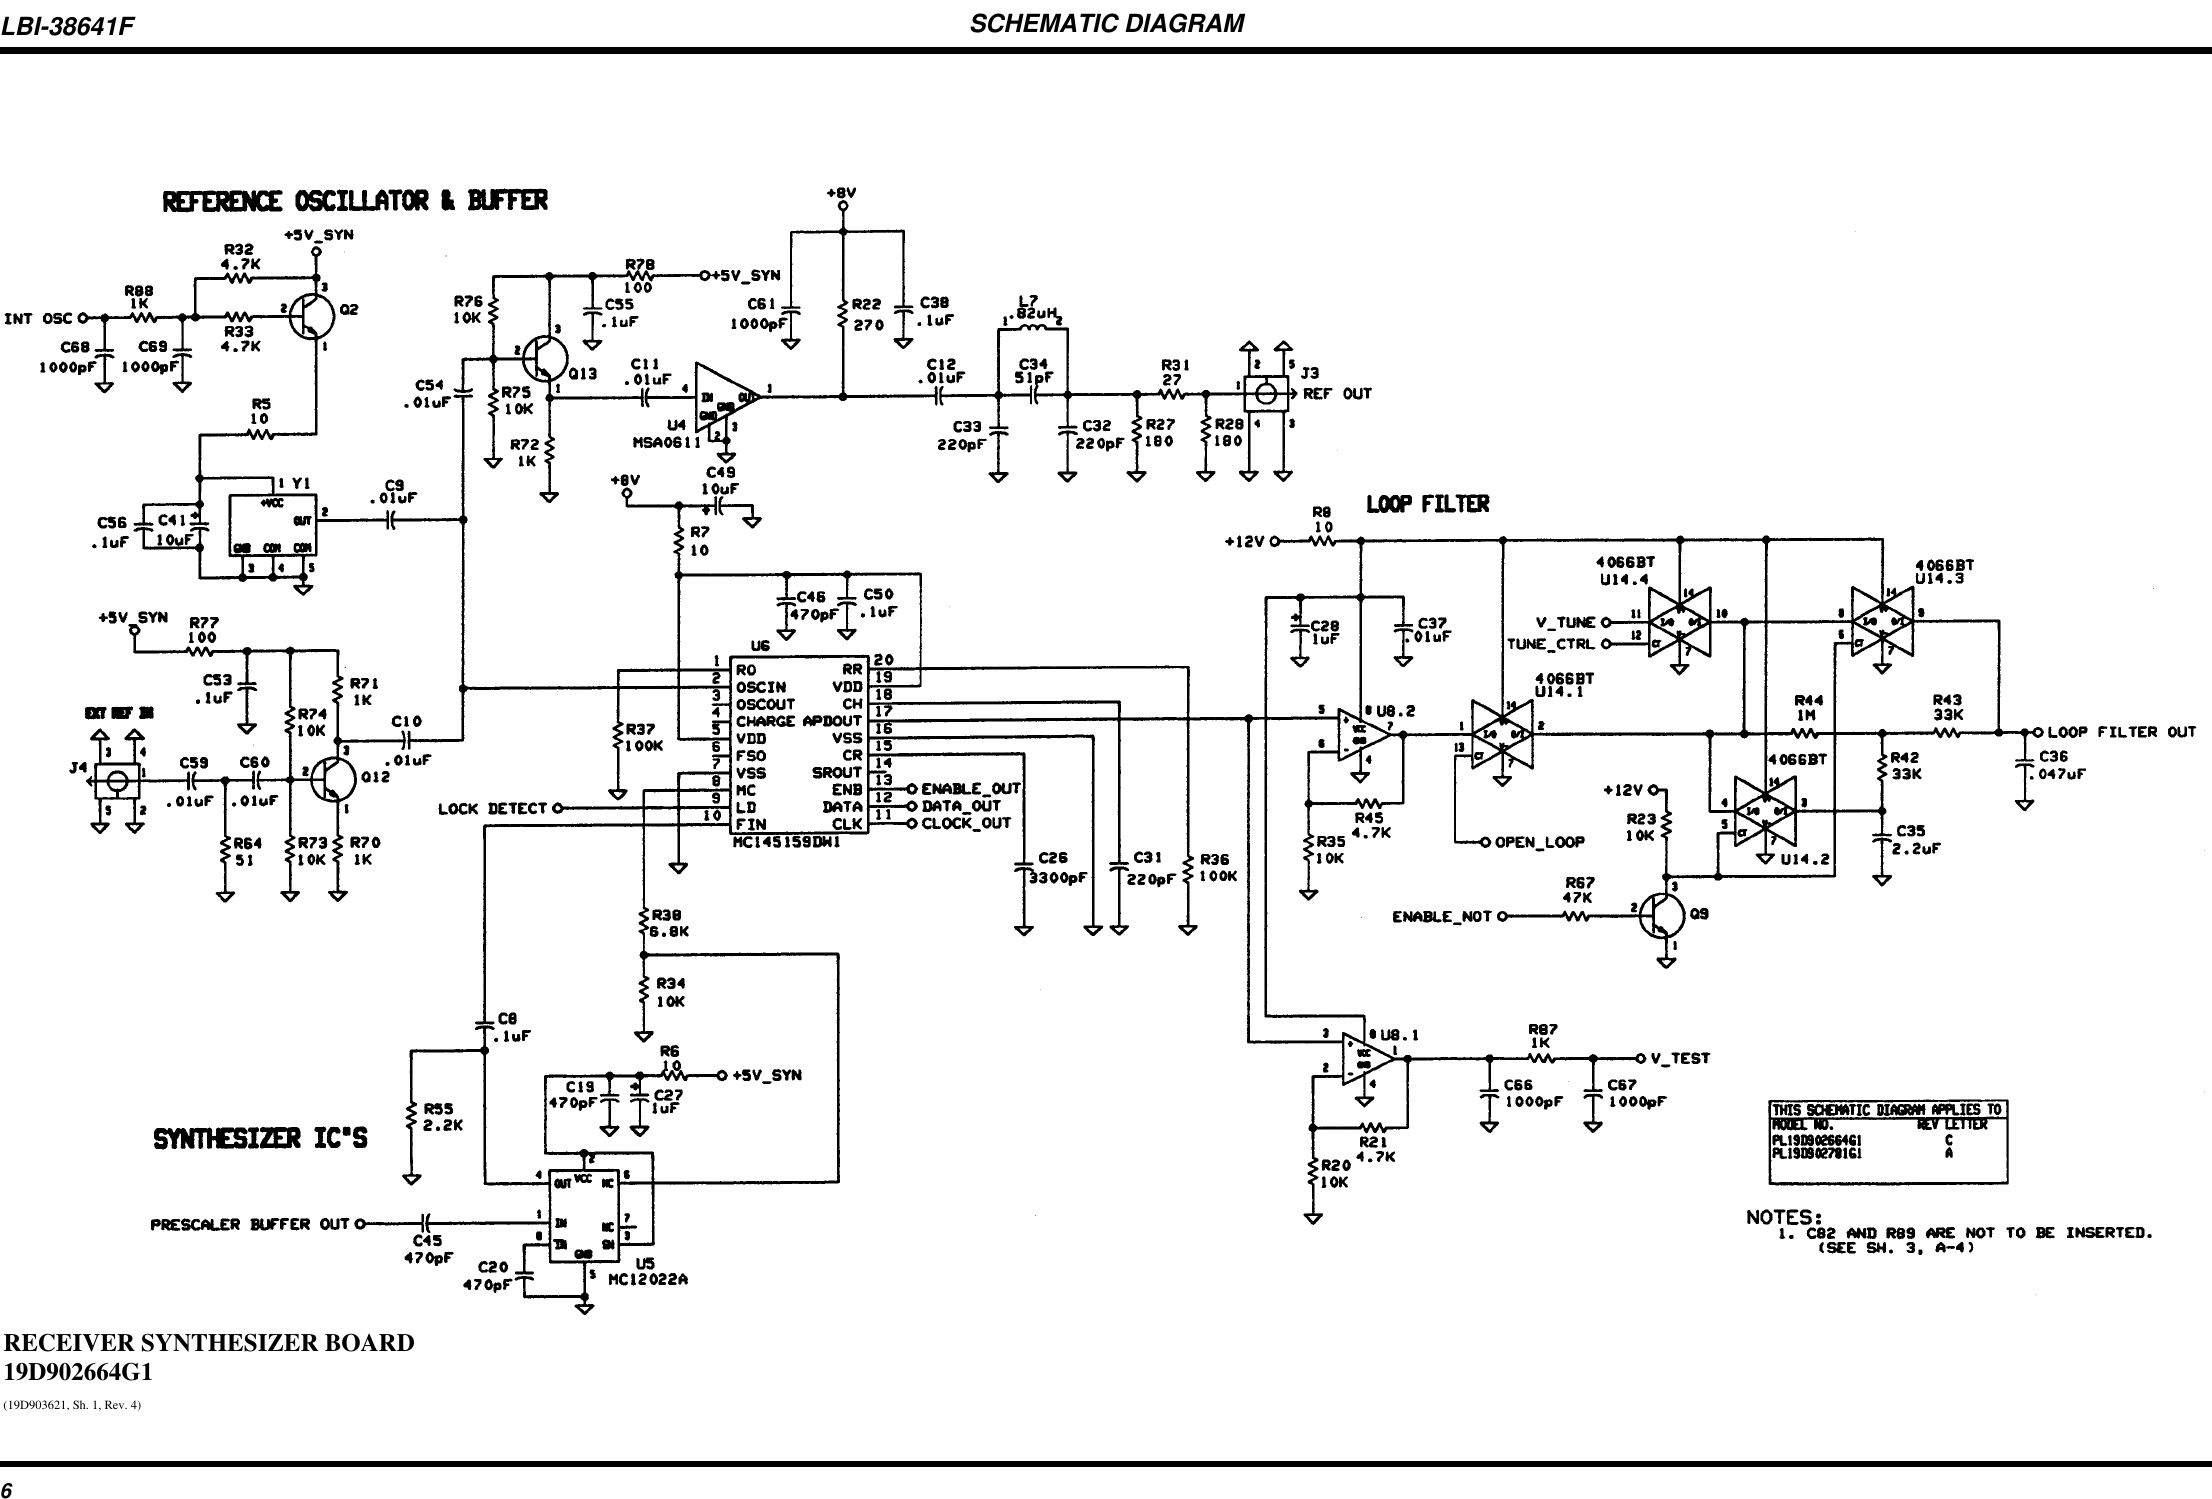 SCHEMATIC DIAGRAMRECEIVER SYNTHESIZER BOARD19D902664G1(19D903621, Sh. 1, Rev. 4)LBI-38641F6